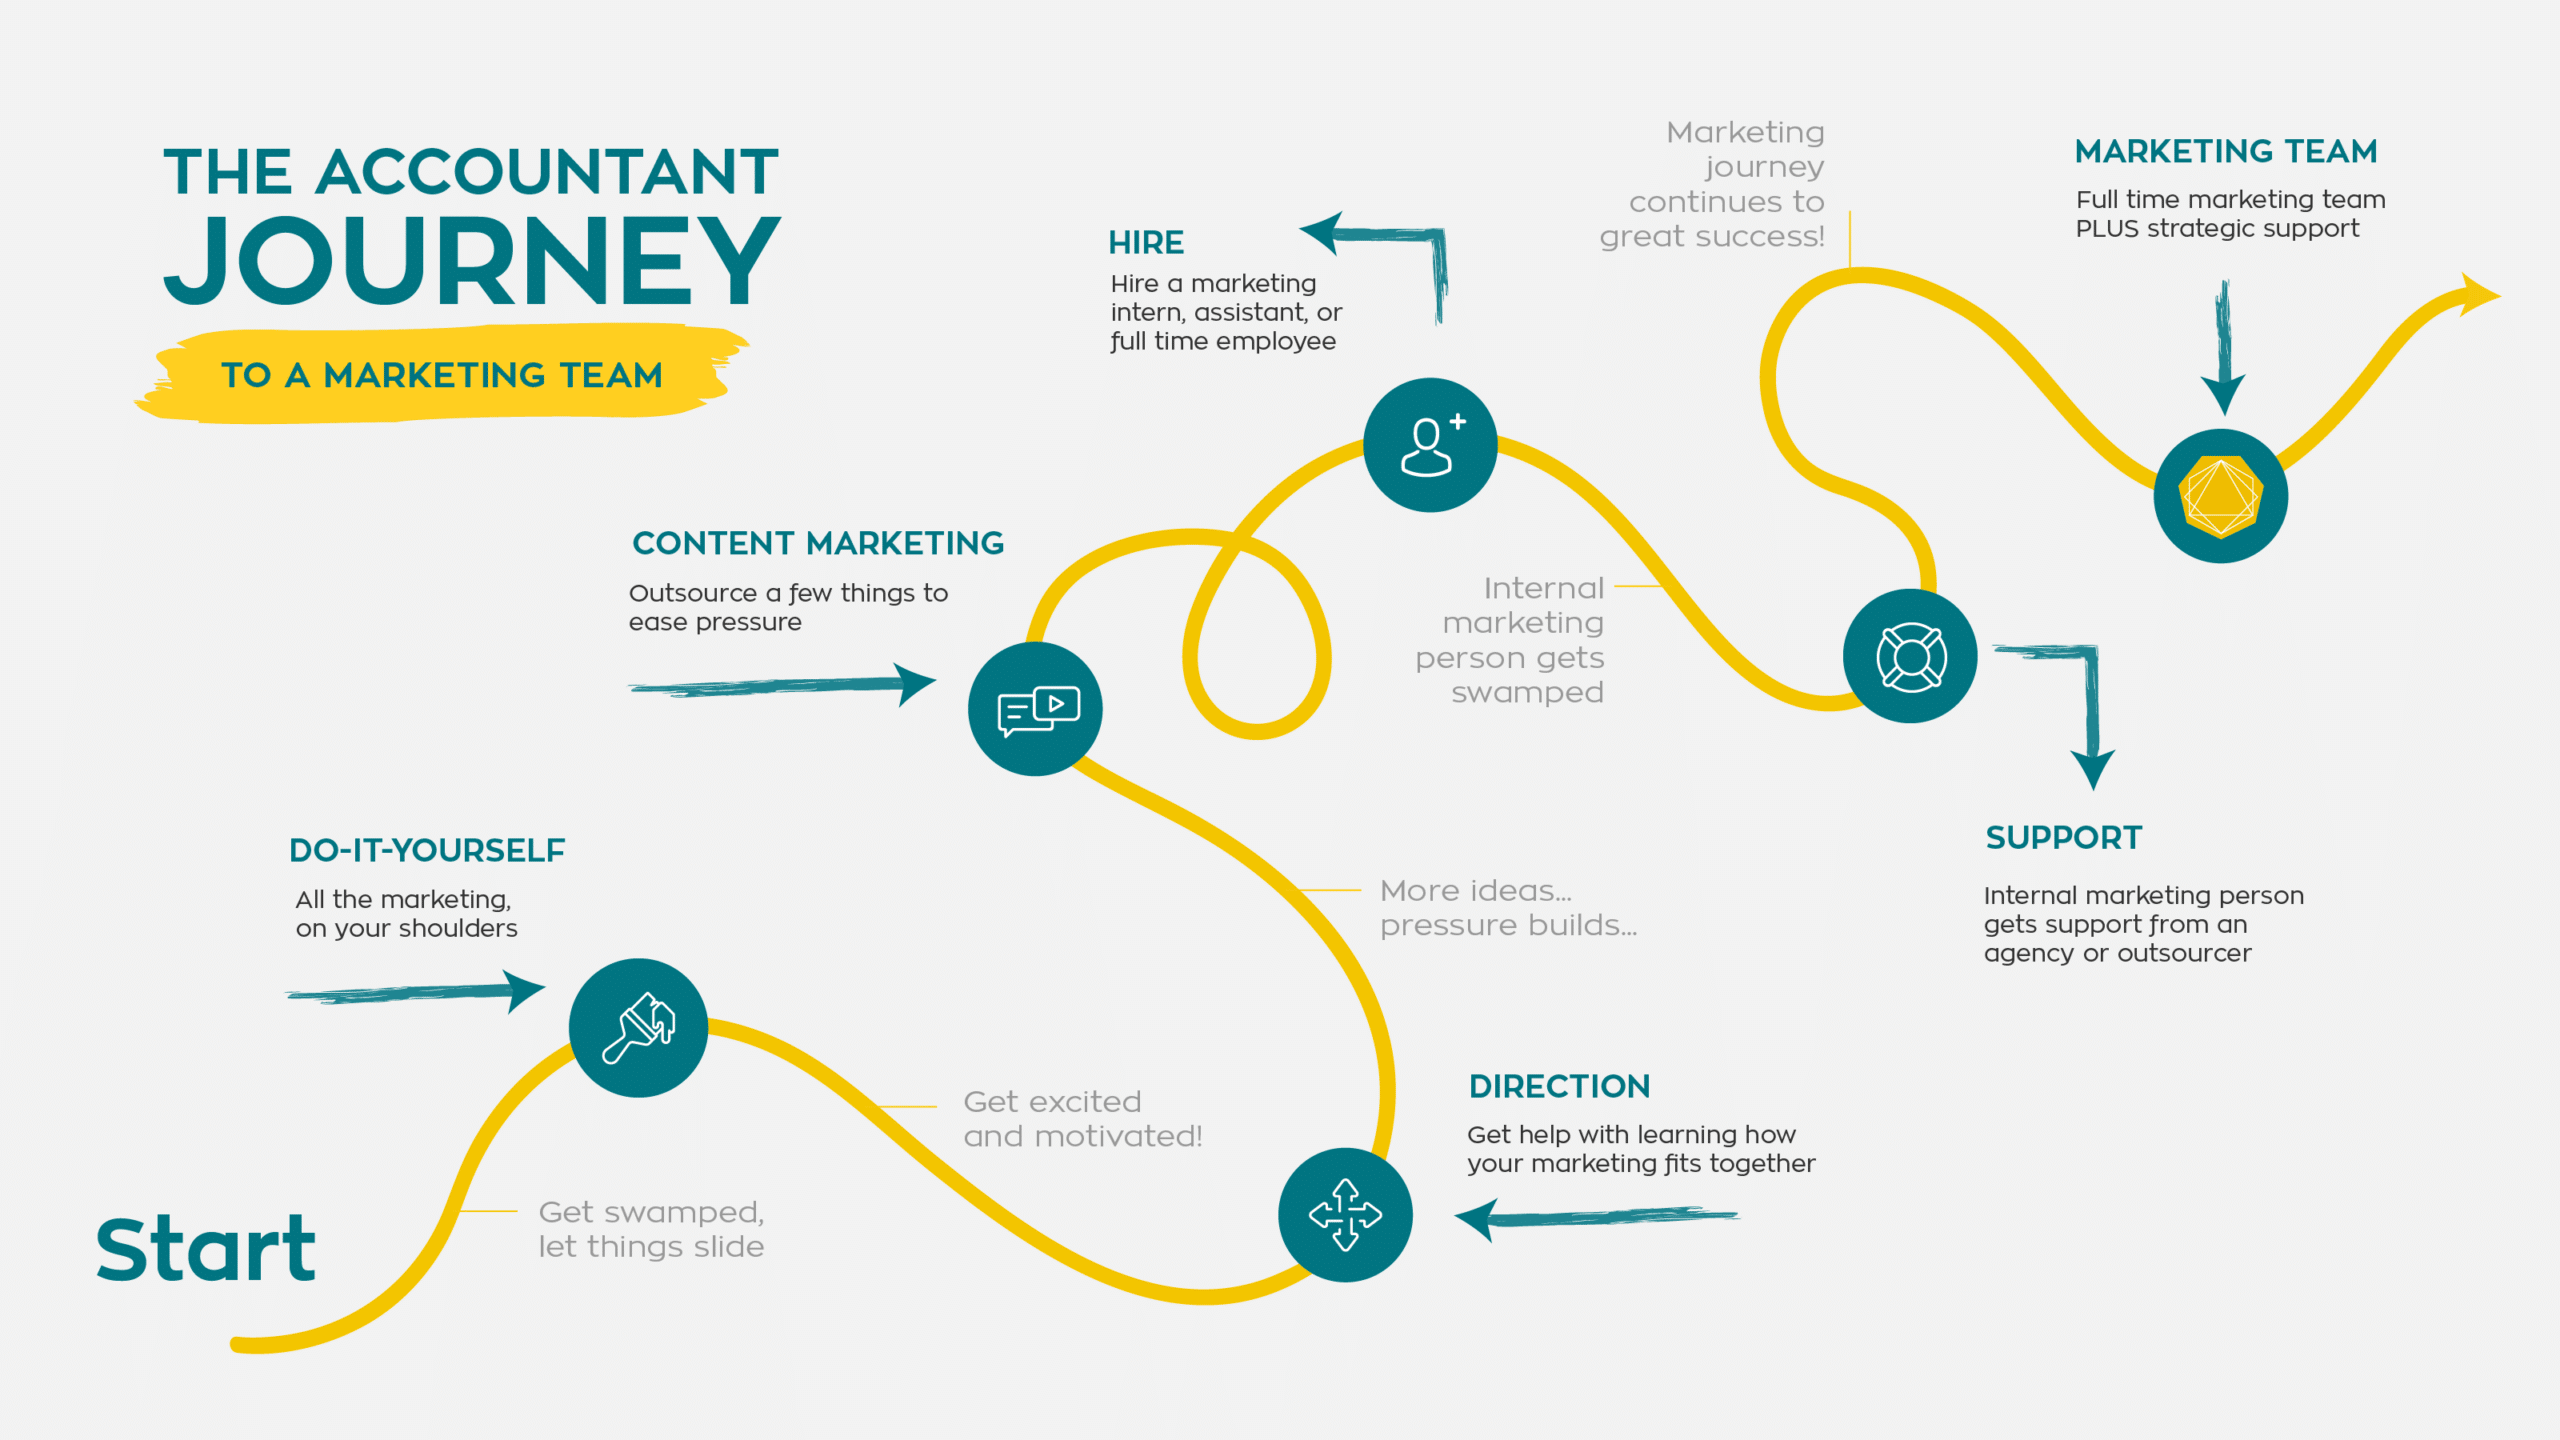 Your accounting firm’s journey to a full marketing team